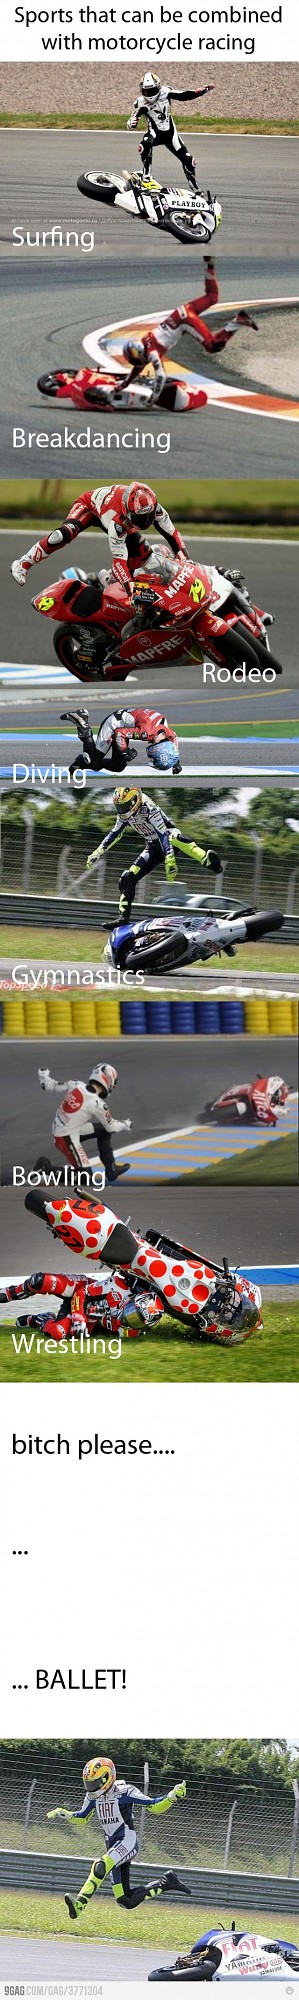 Sports that can be combine with Motorcycle Racing